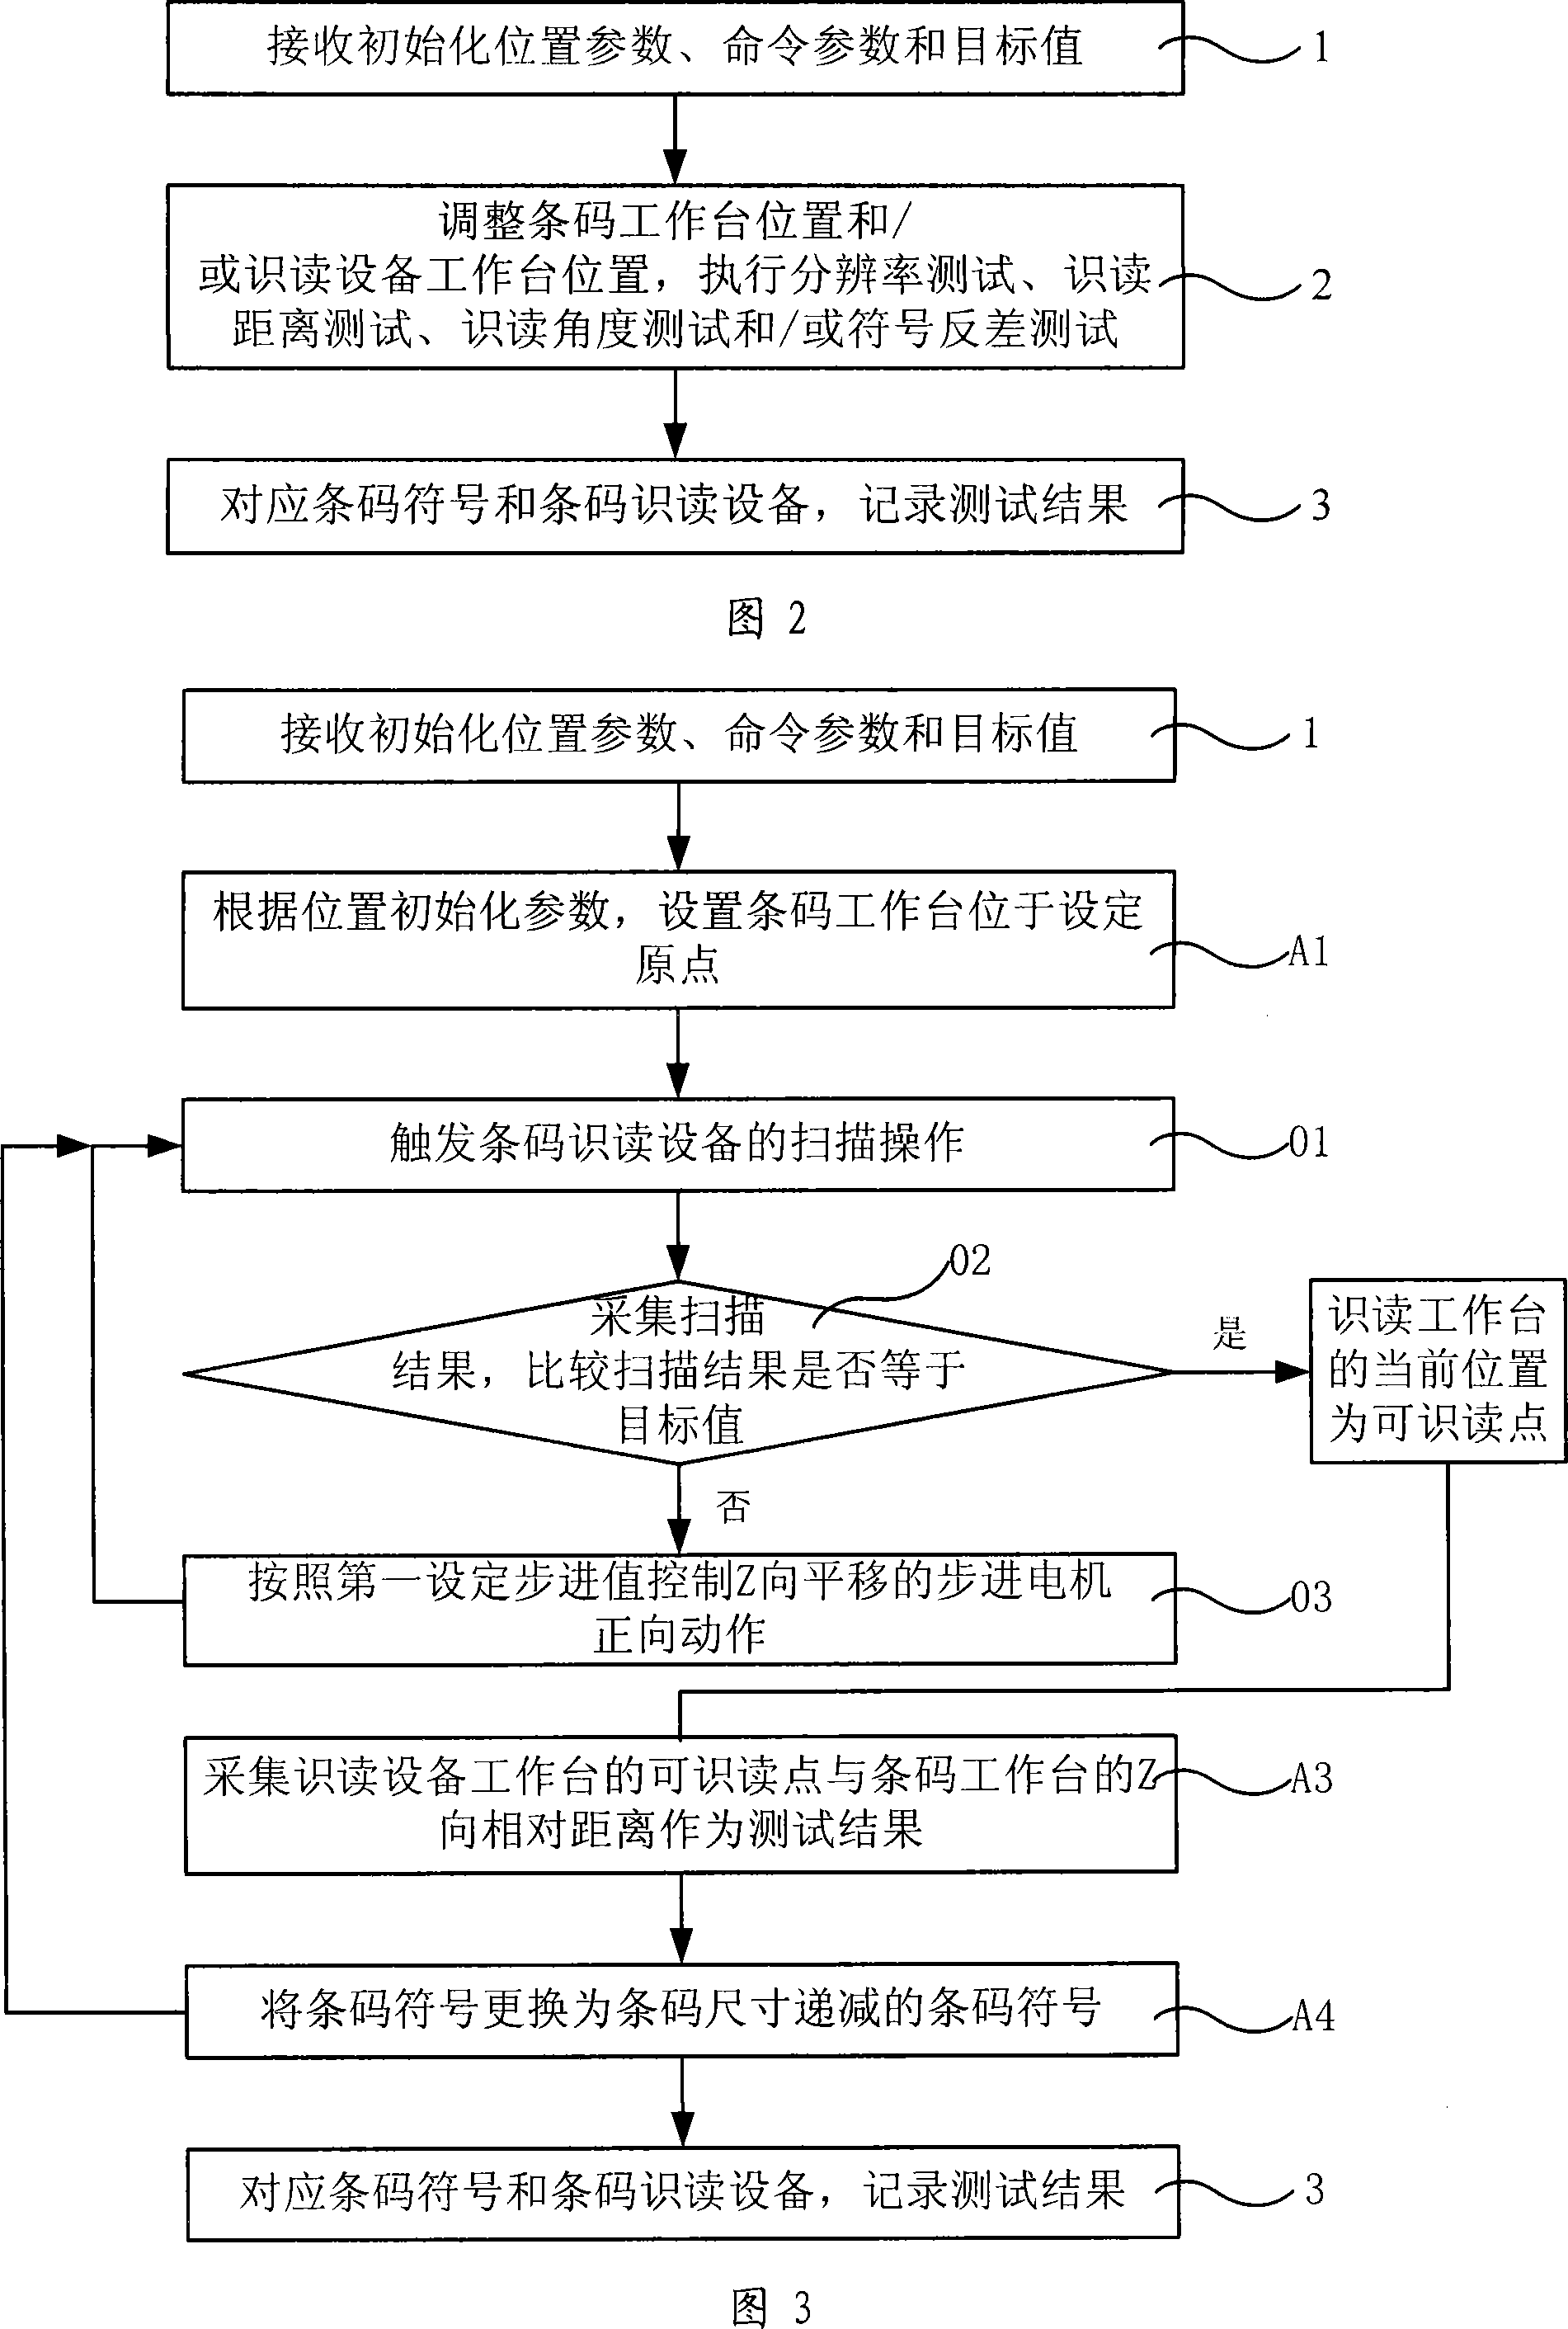 Method and system for controlling the test of bar-code recognizing device